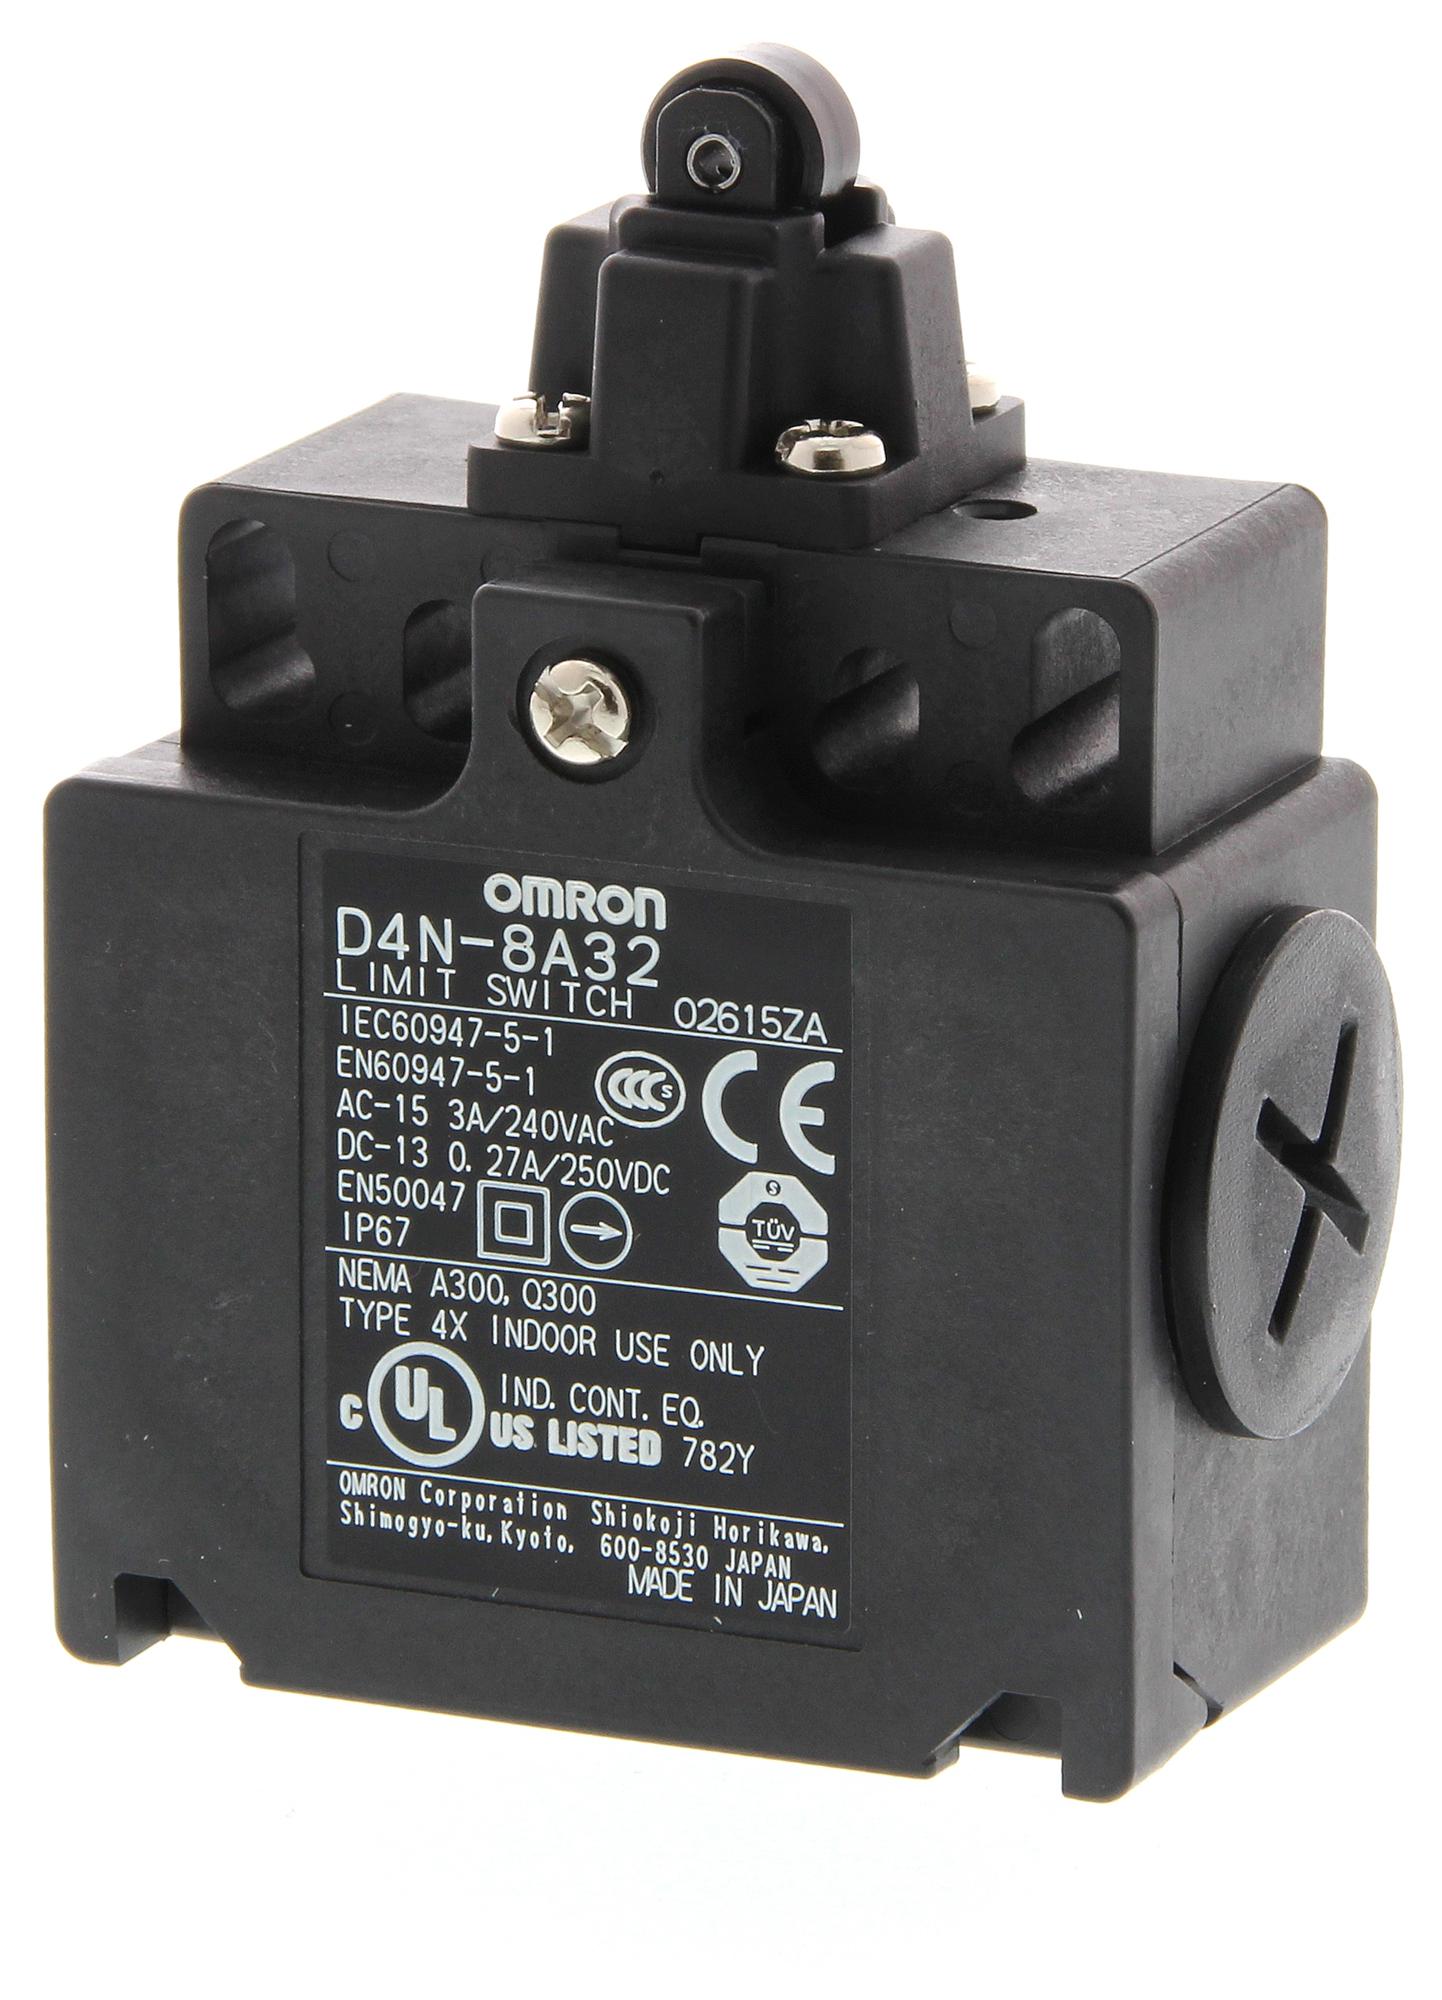 D4N-8A32 LIMIT SWITCH SWITCHES OMRON